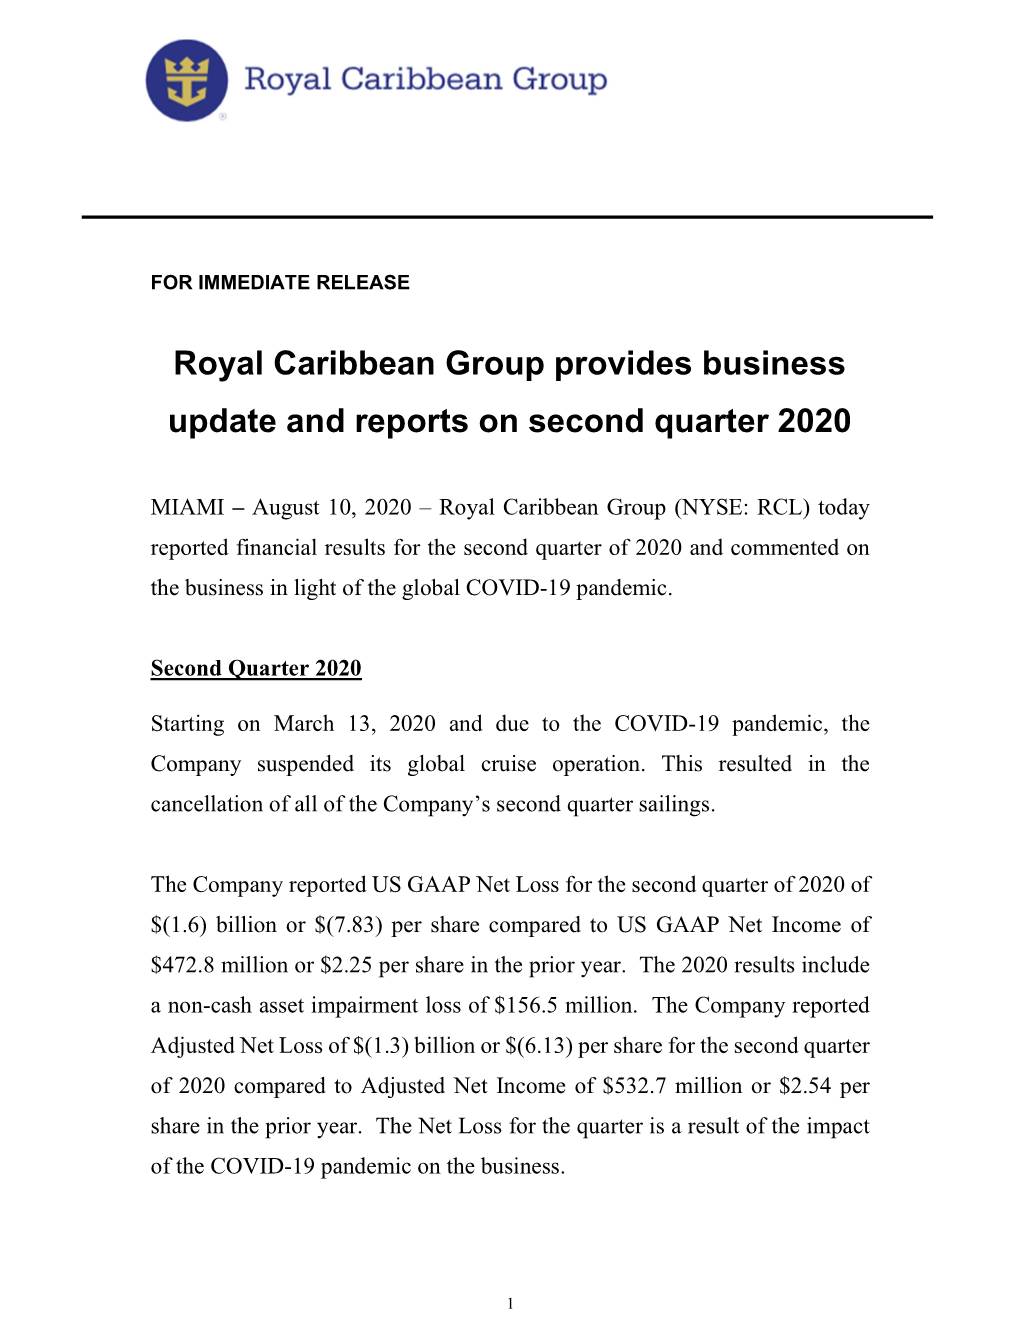 Royal Caribbean Group Provides Business Update and Reports on Second Quarter 2020